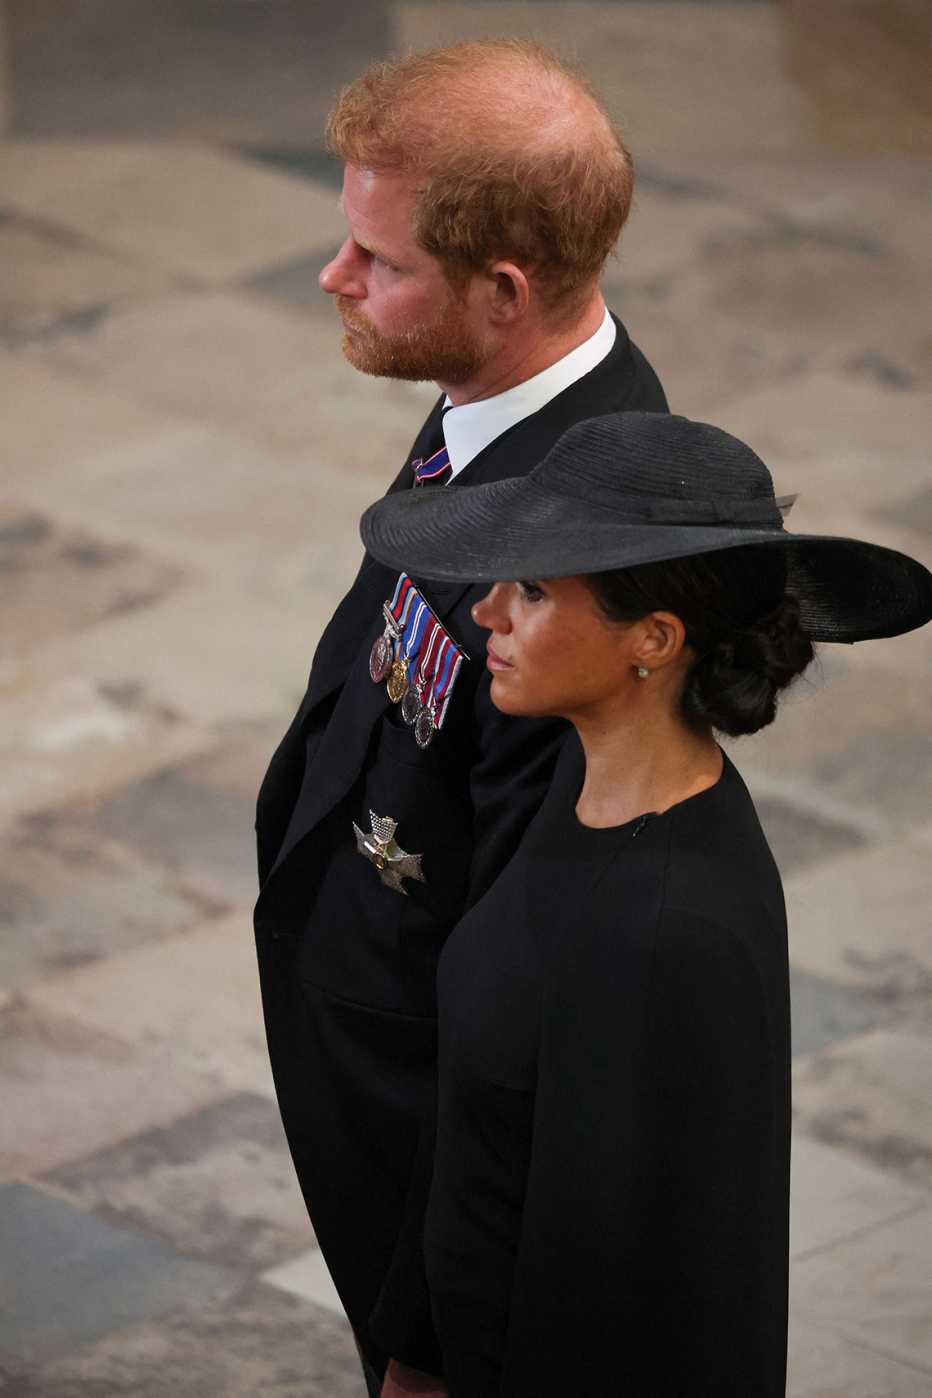 Britain's Prince Harry, Duke of Sussex and Meghan, Duchess of Sussex (R) attend the State Funeral Service for Britain's Queen Elizabeth II